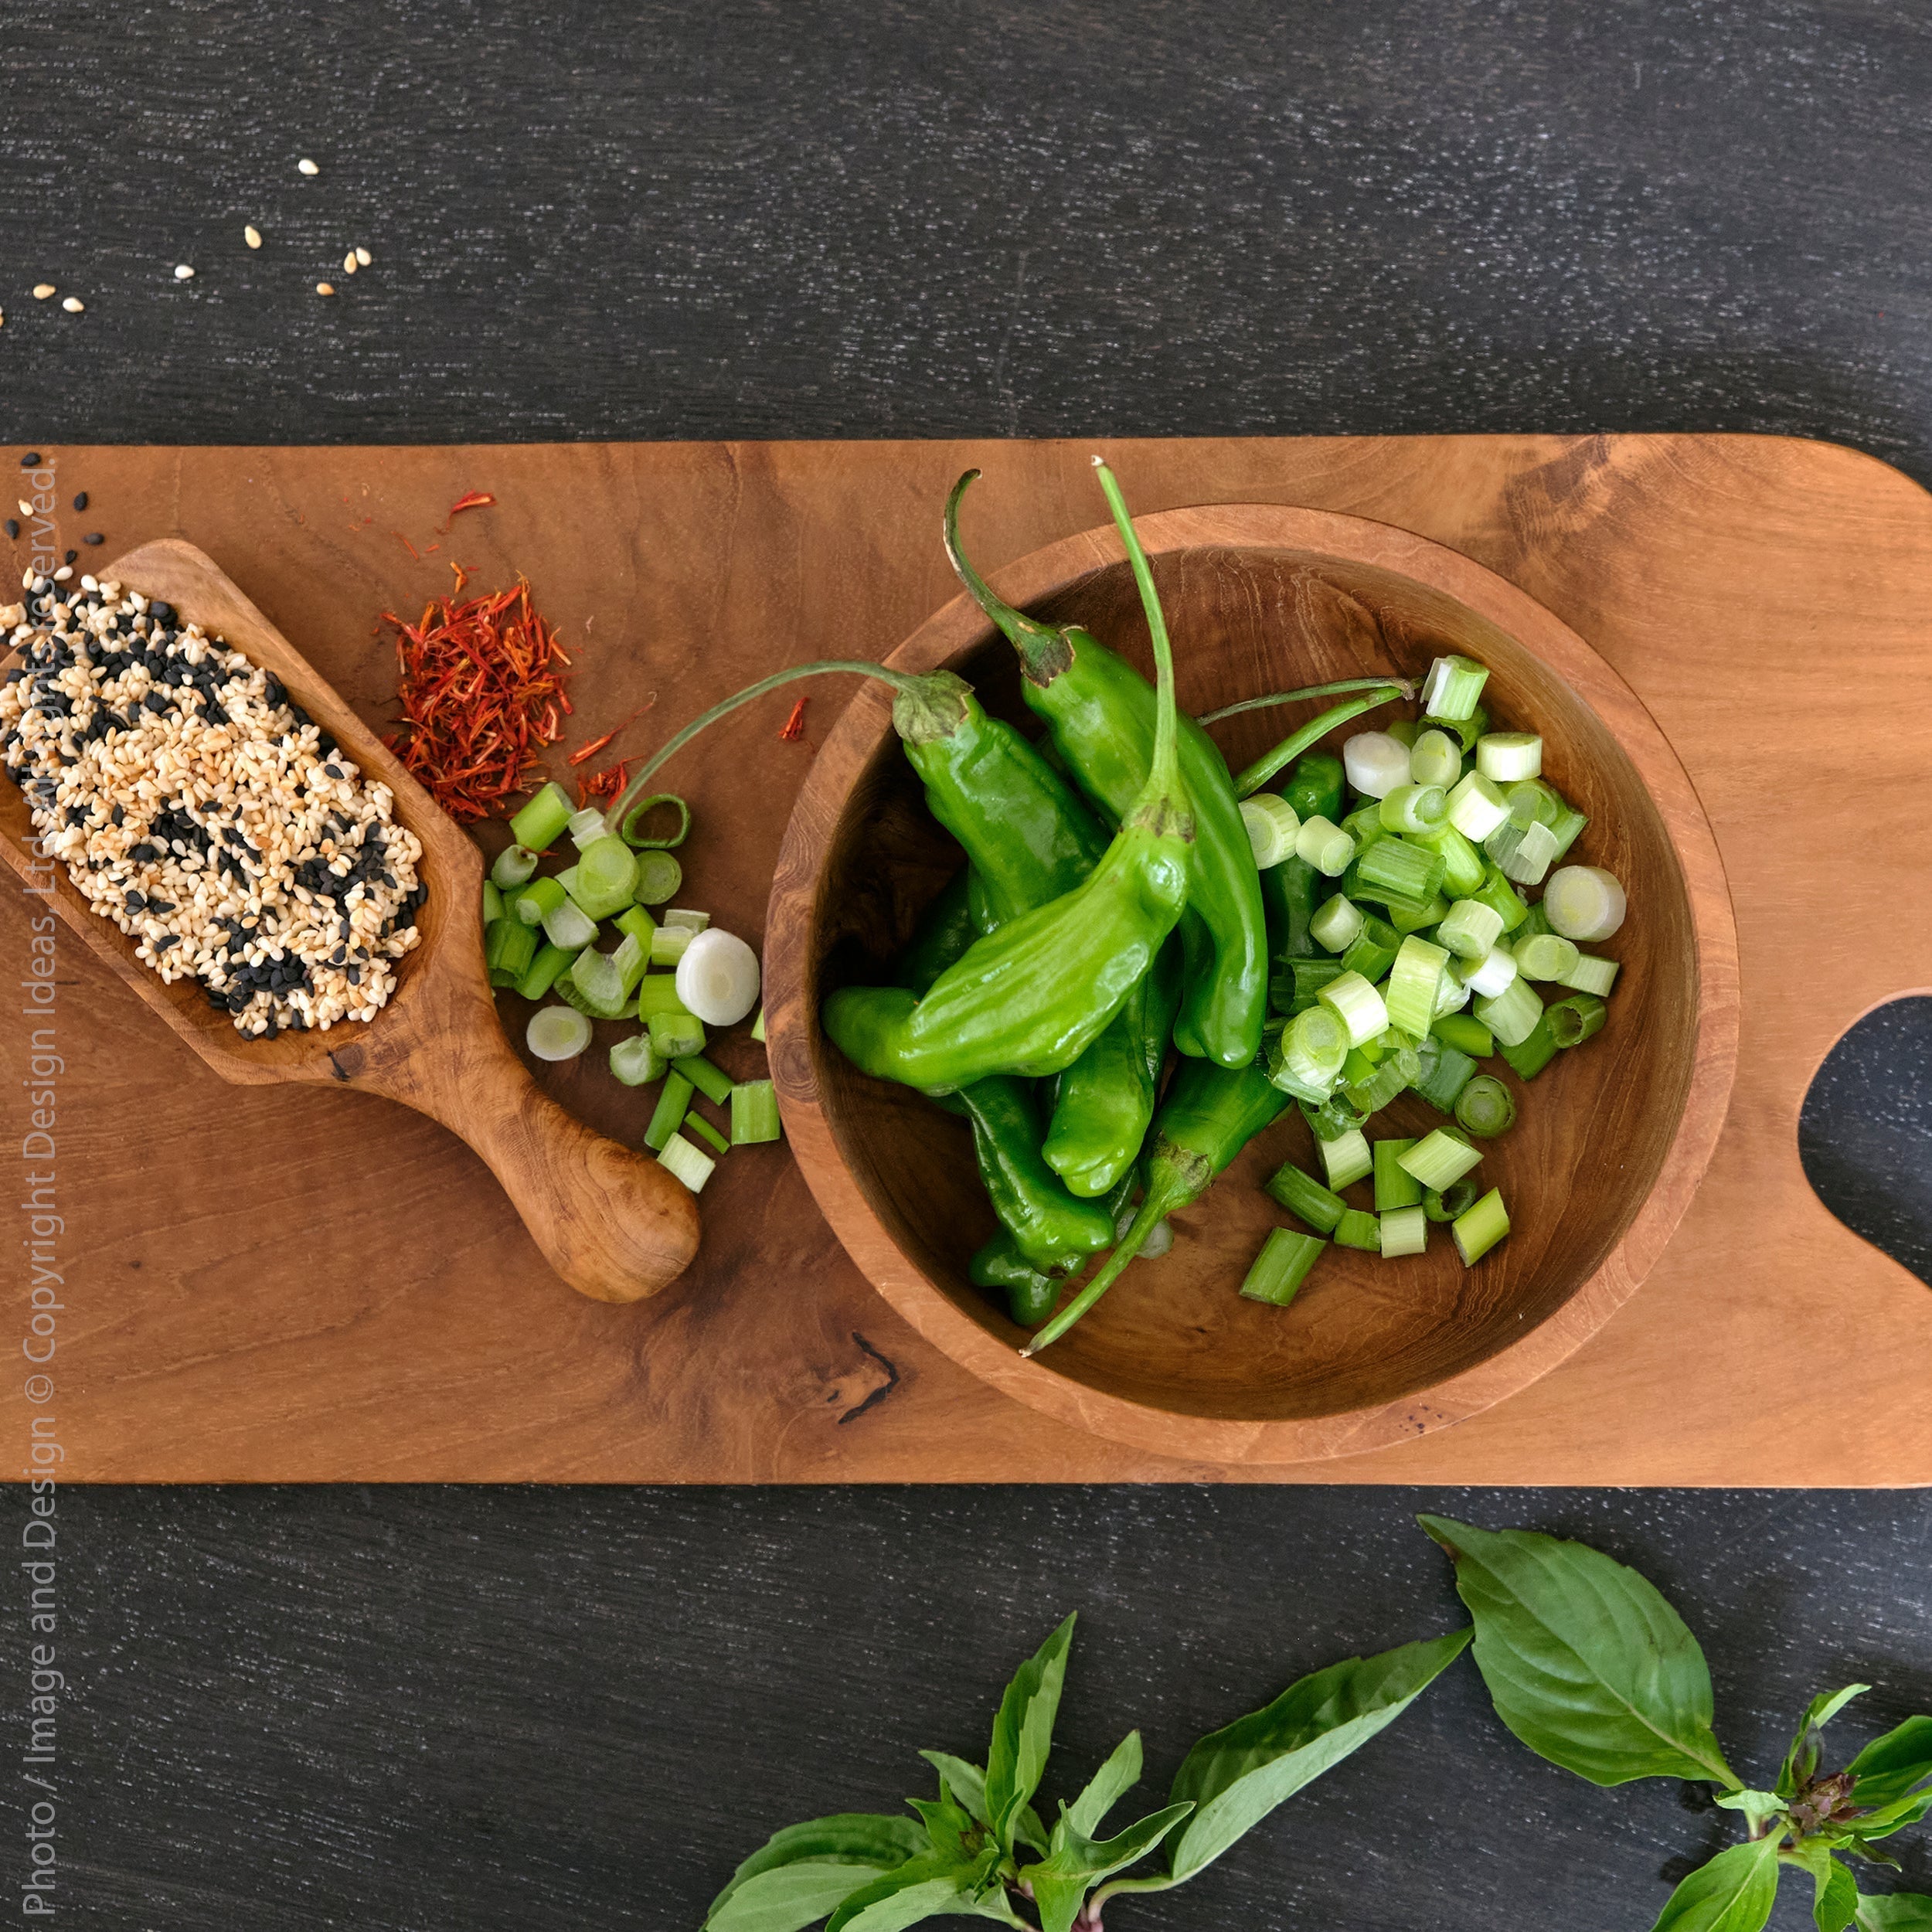 Chiku™ platter (15.75x6.3x.6in) - Natural | Image 9 | Premium Platter from the Chiku collection | made with Teak for long lasting use | sustainably sourced with recycled materials | texxture